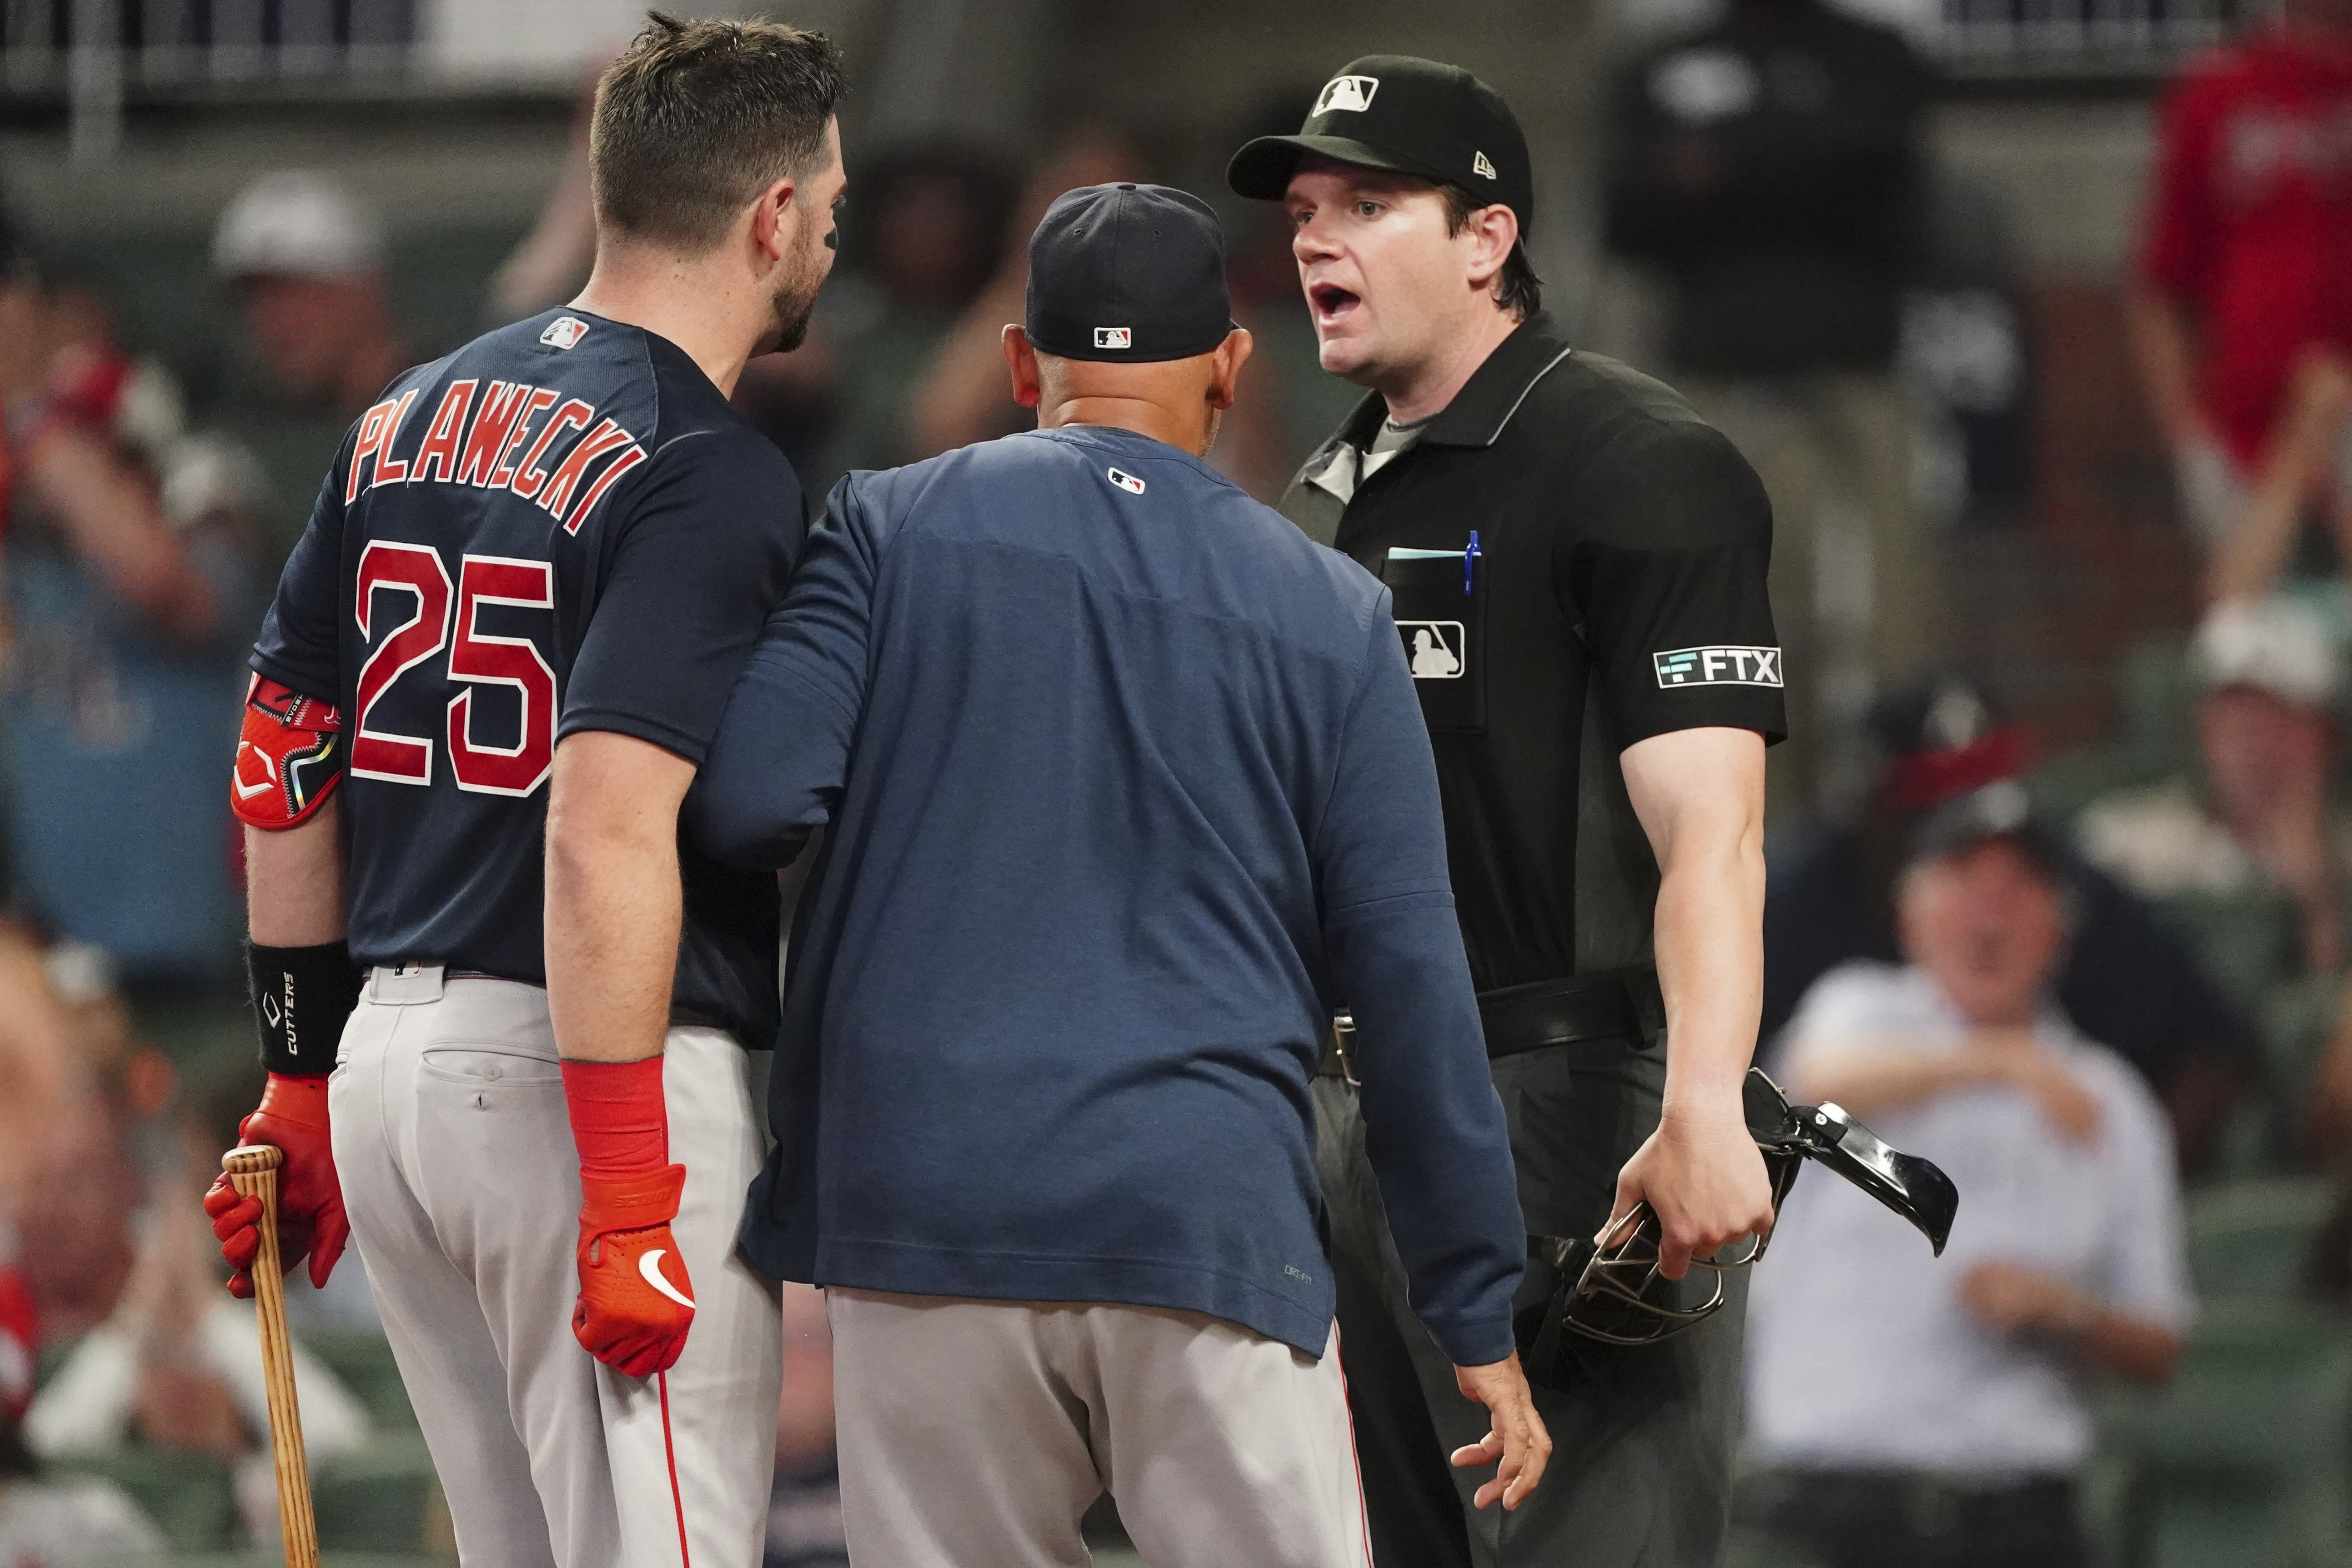 In Defense of Umpires: Why Complaints About MLB's 'Ump Show